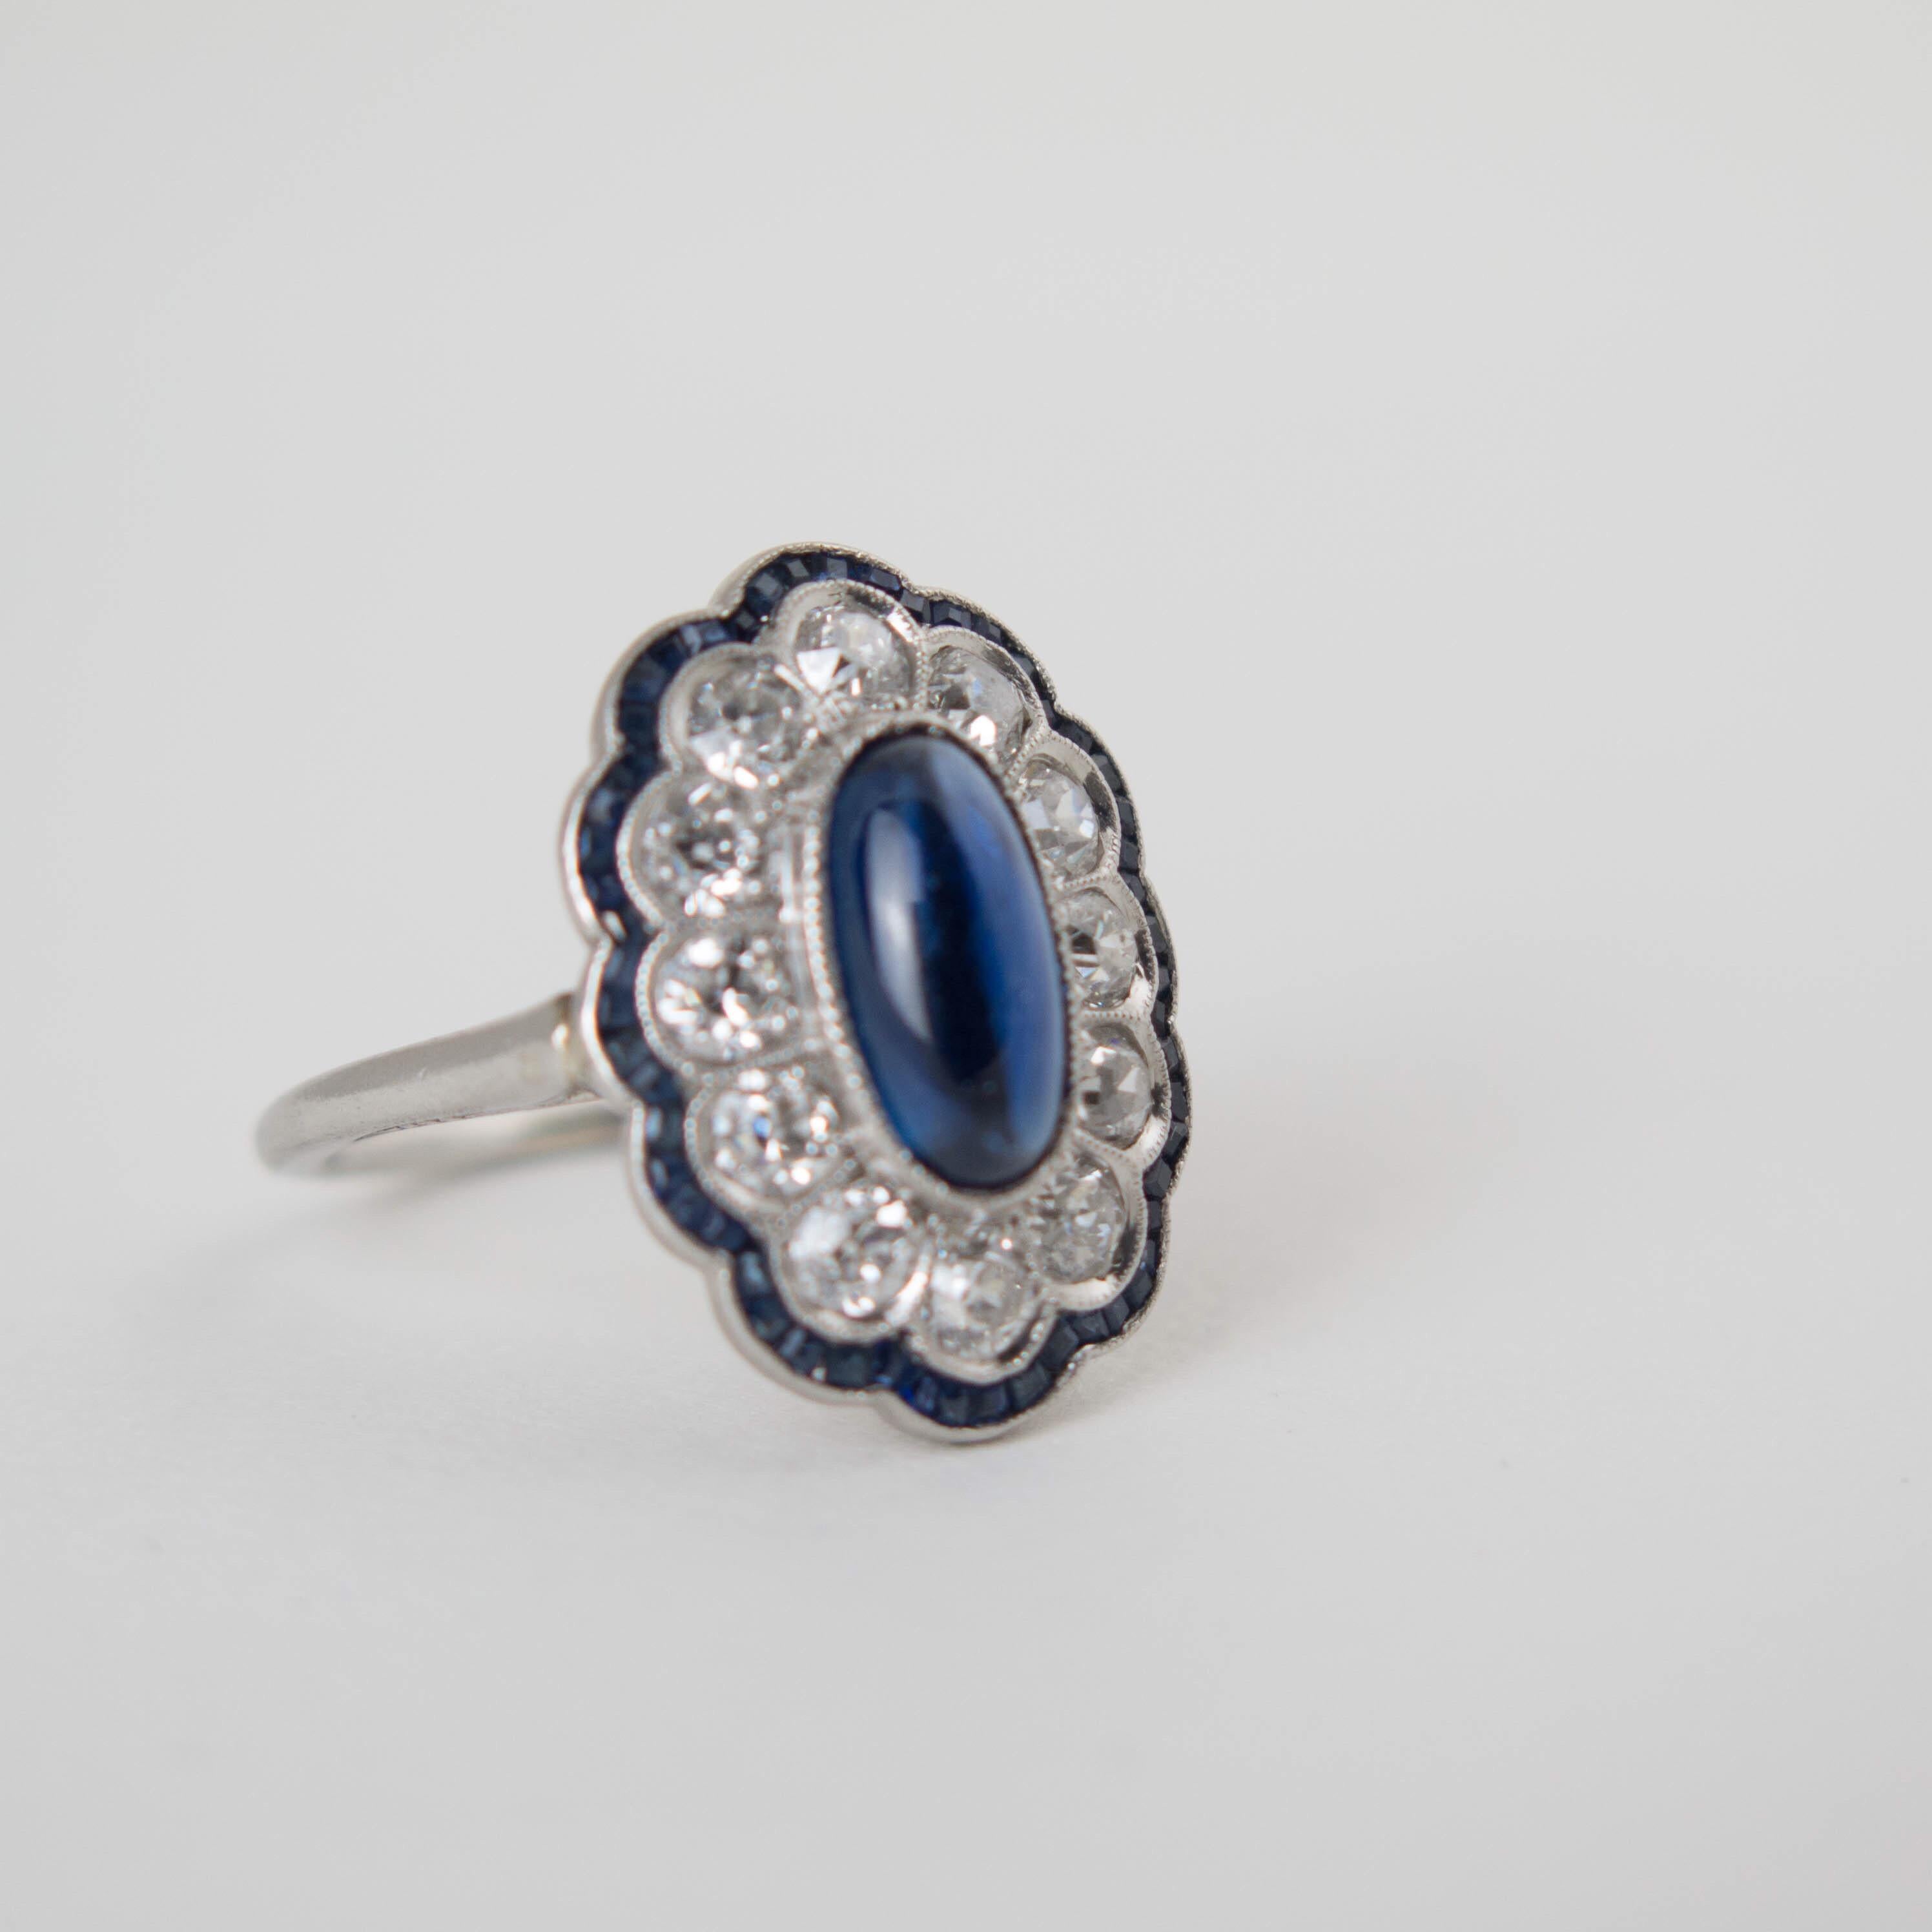 An exquisite and charming Edwardian sapphire and diamond engagement ring set in platinum. 

The early 20th century Edwardian platinum ring is centered around a luscious long and tall natural blue sapphire cabochon. The central sapphire is surrounded